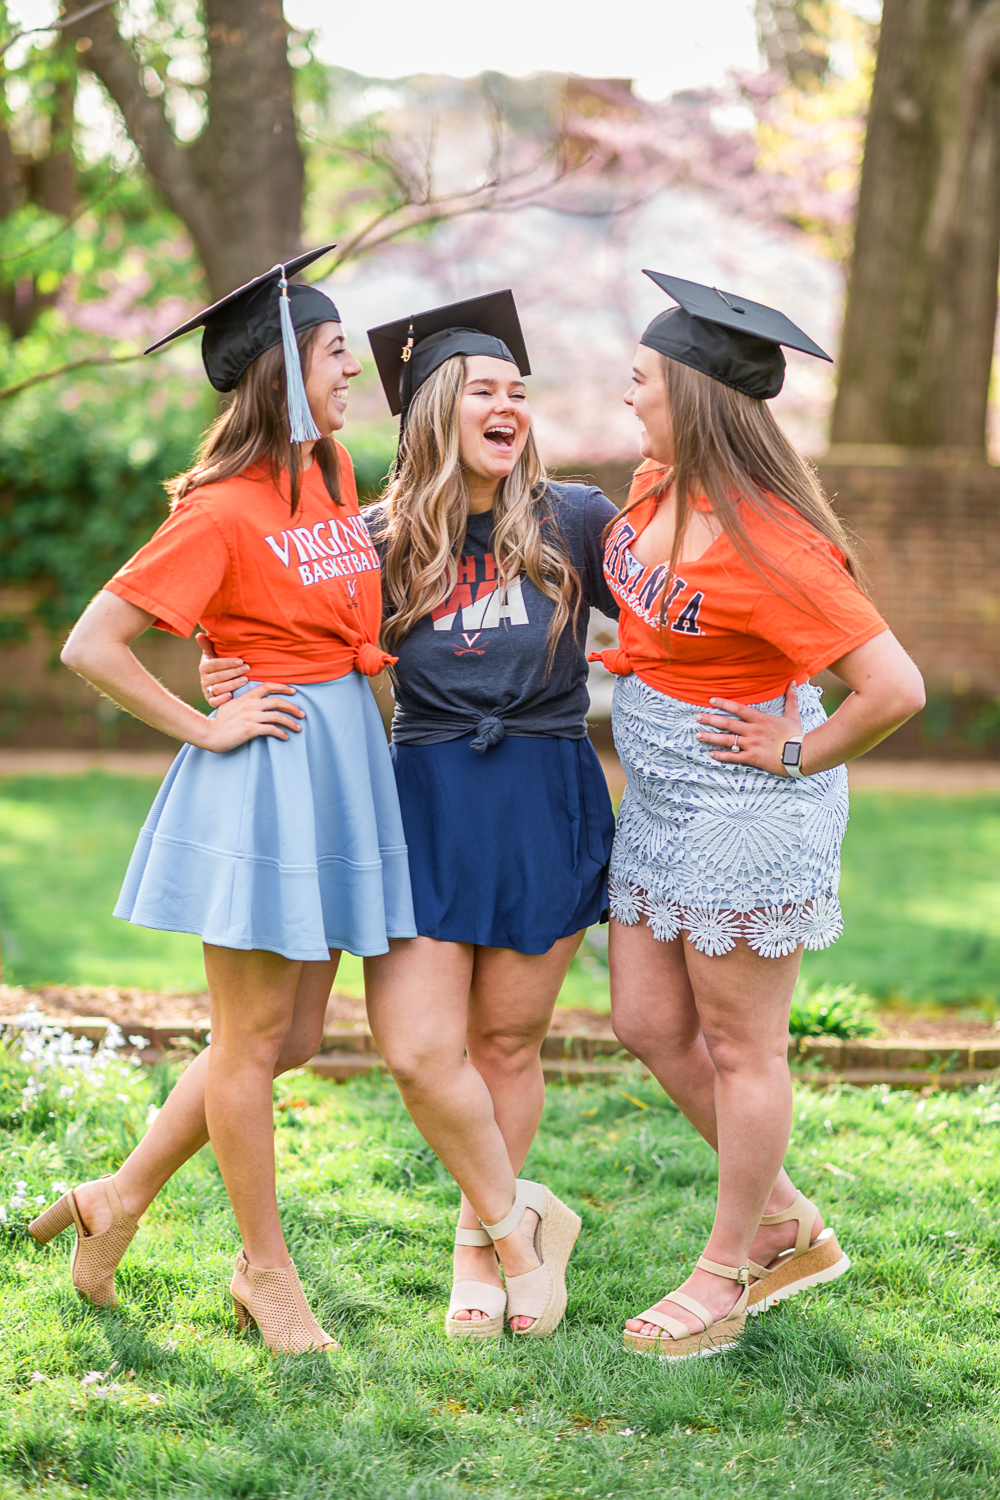 4 Things We Learned During a UVA Graduation Photoshoot